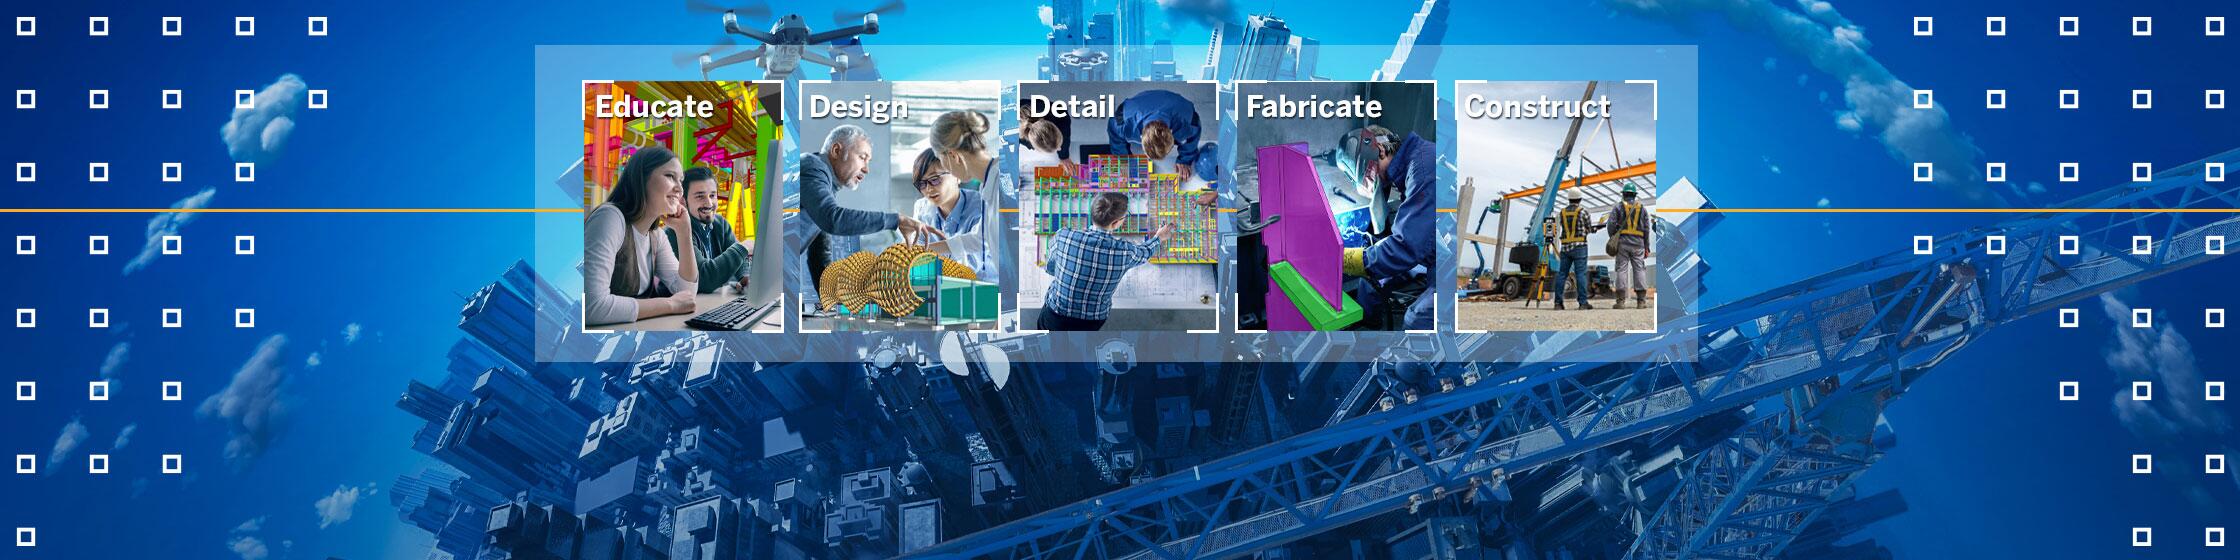 Educate, design, detail, fabricate and construct with Tekla software by Trimble